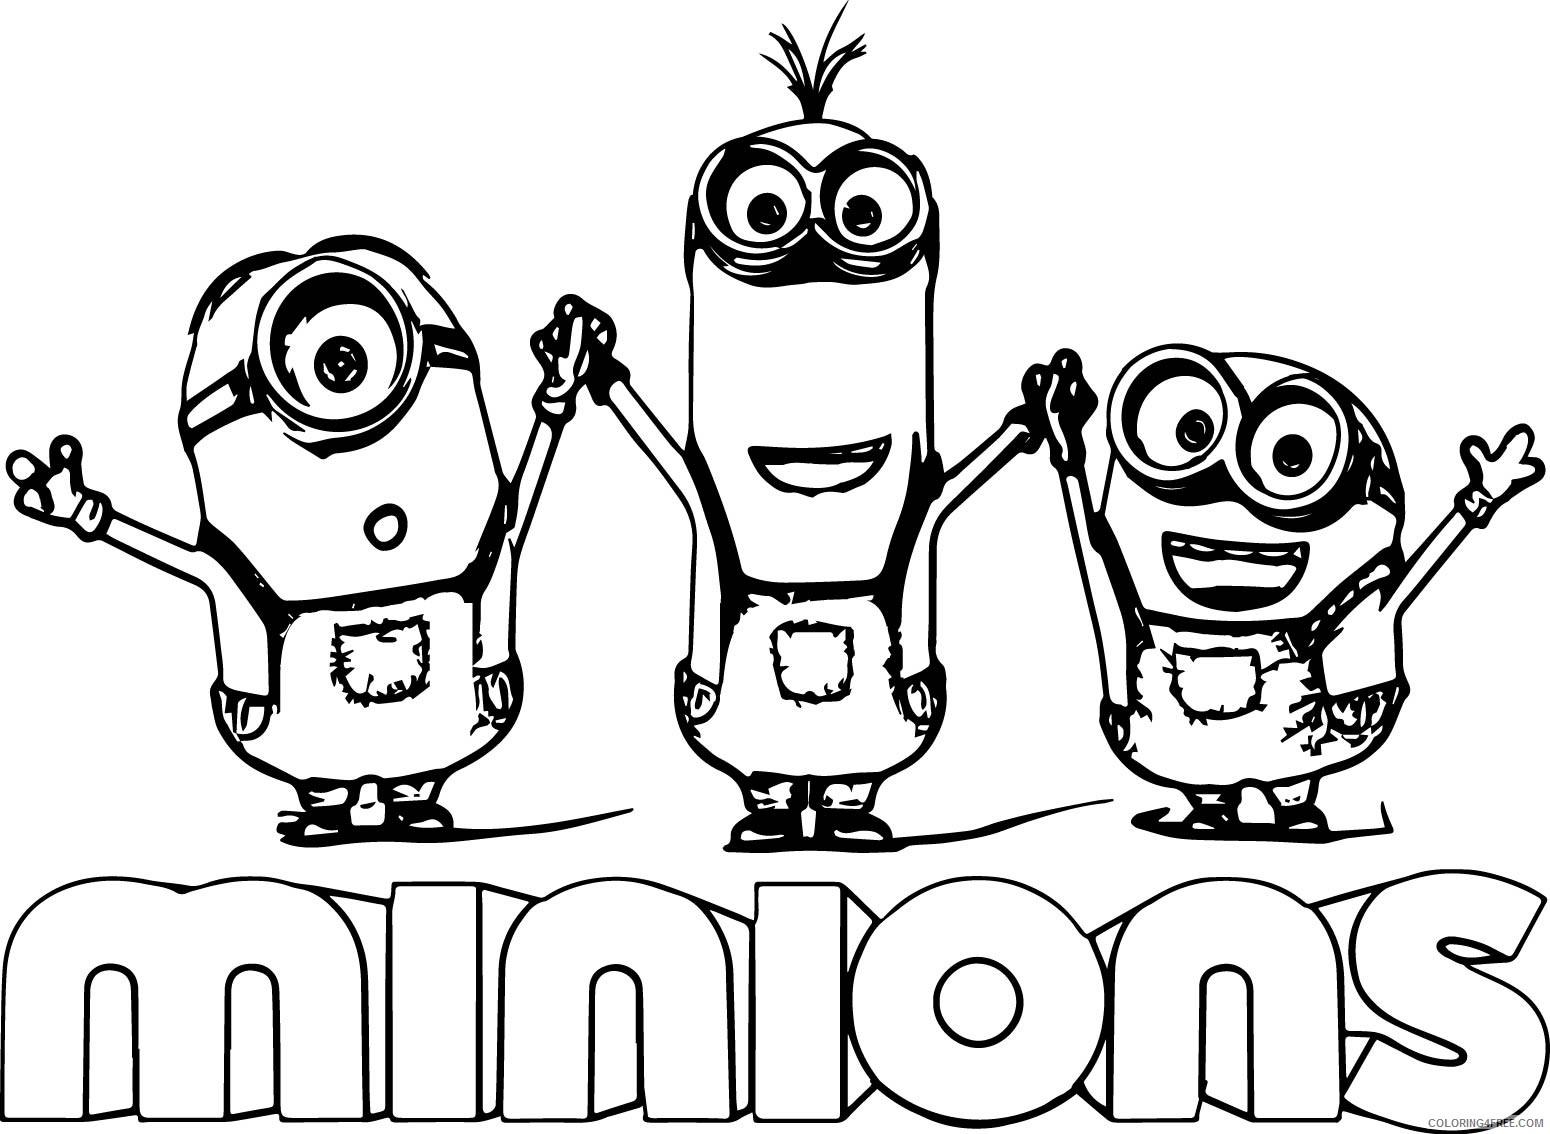 printable minions coloring pages for kids Coloring4free - Coloring4Free.com